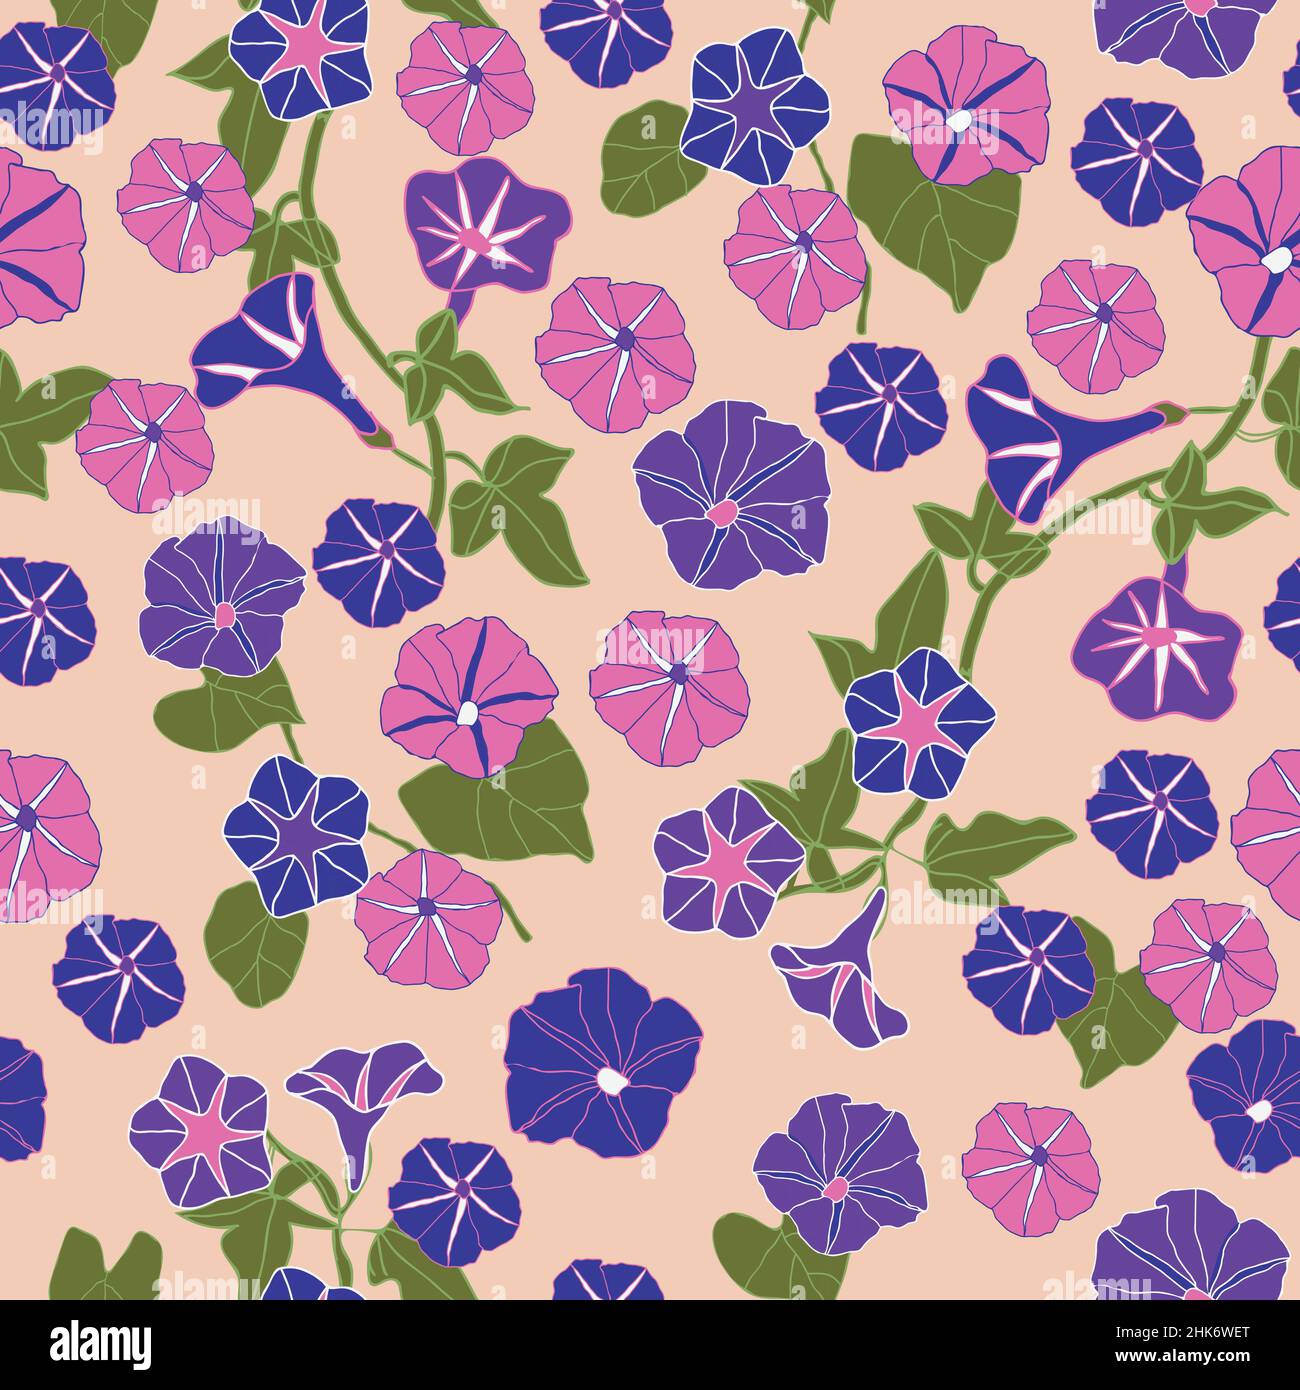 Morning glory flowers seamless pattern. Vintage floral vector illustration. Perfect for textile print, wedding dress, wallpaper and backgrounds. Stock Vector